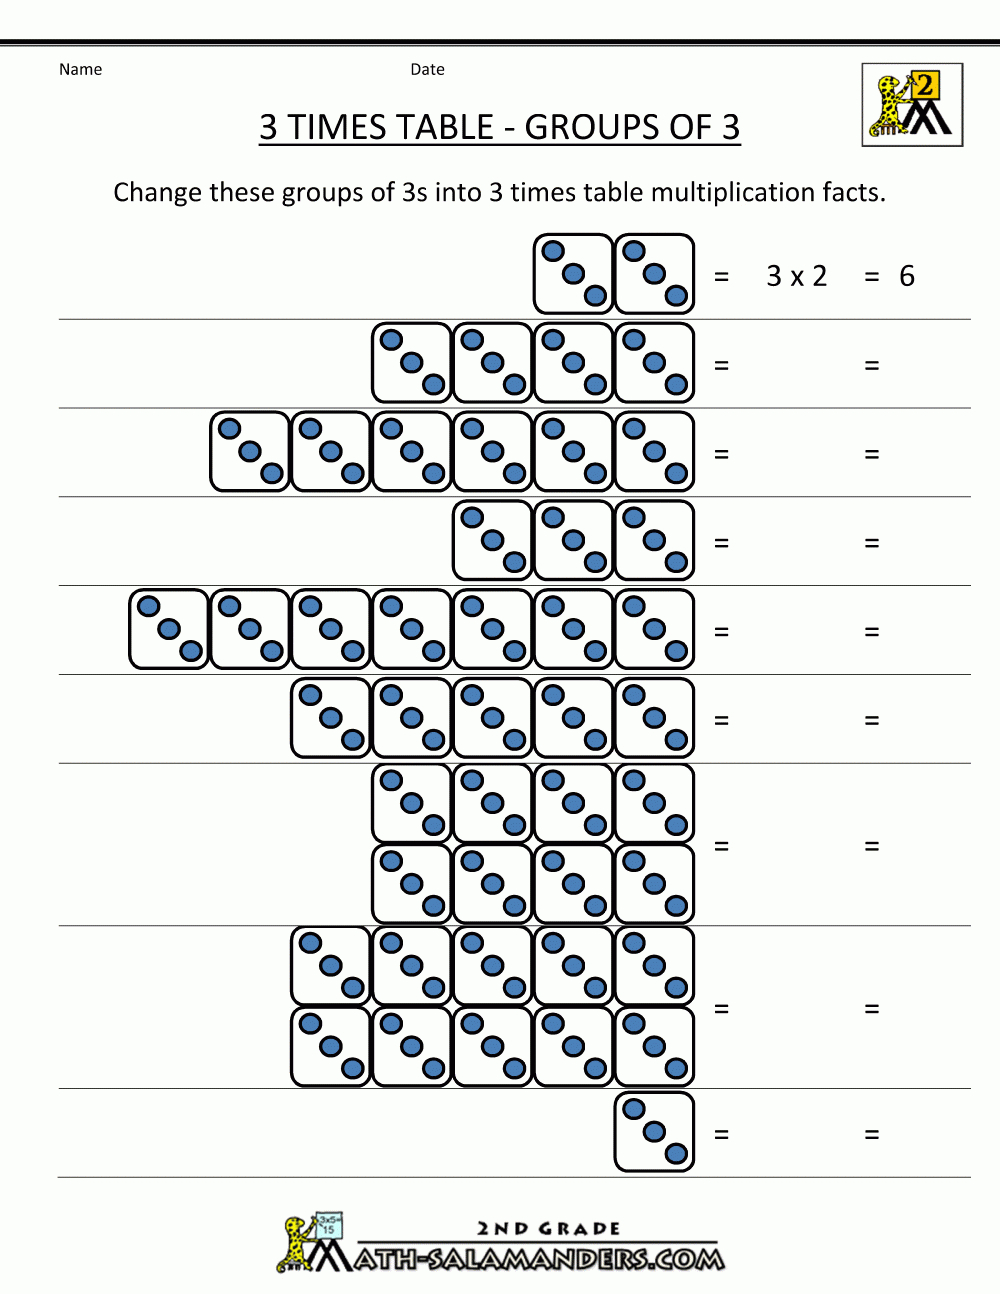 Image Result For 3 Times Multiplication With Pictures With pertaining to Multiplication Worksheets Ks2